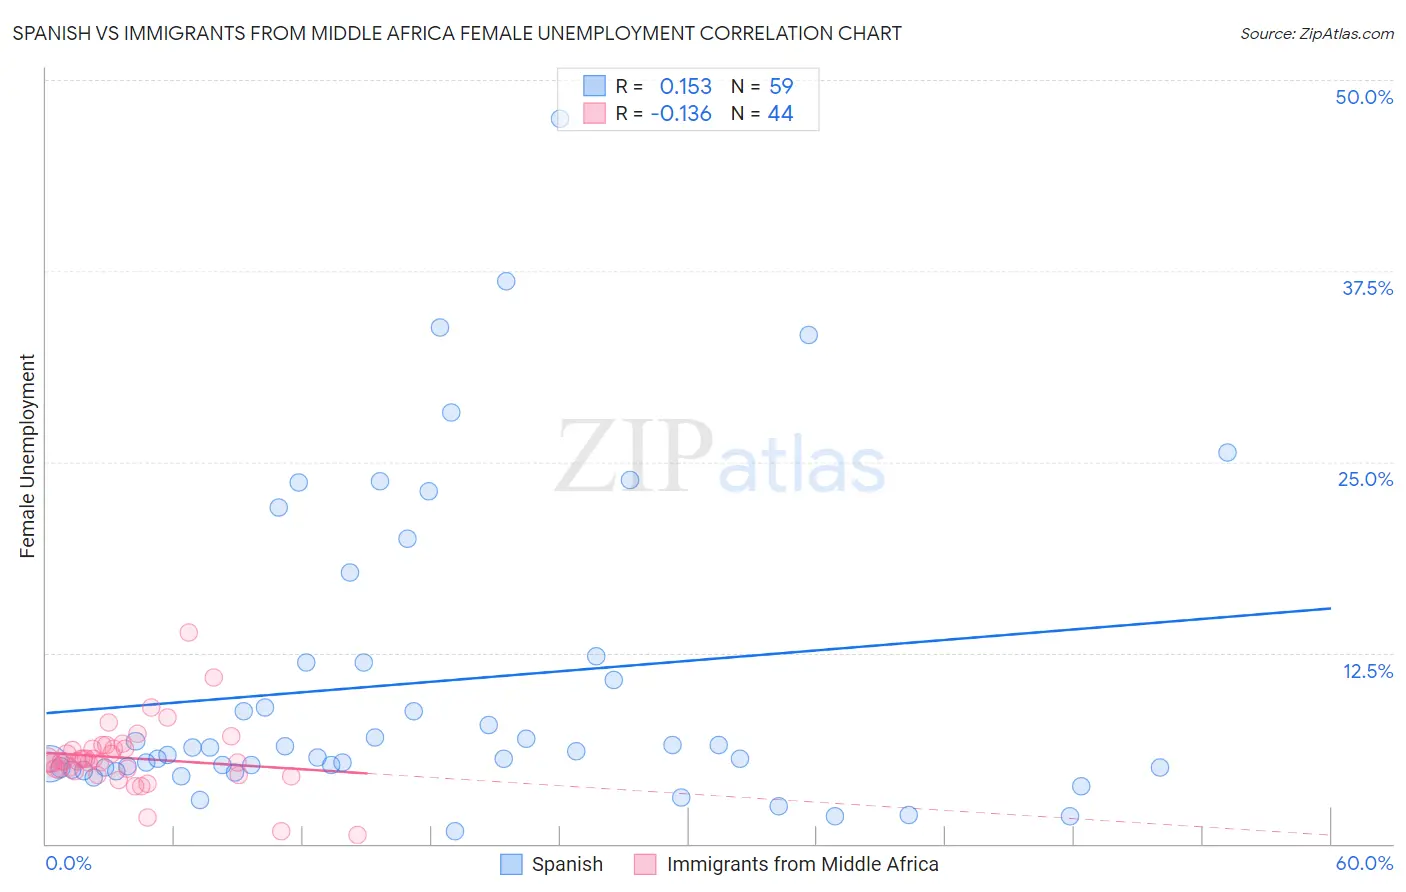 Spanish vs Immigrants from Middle Africa Female Unemployment